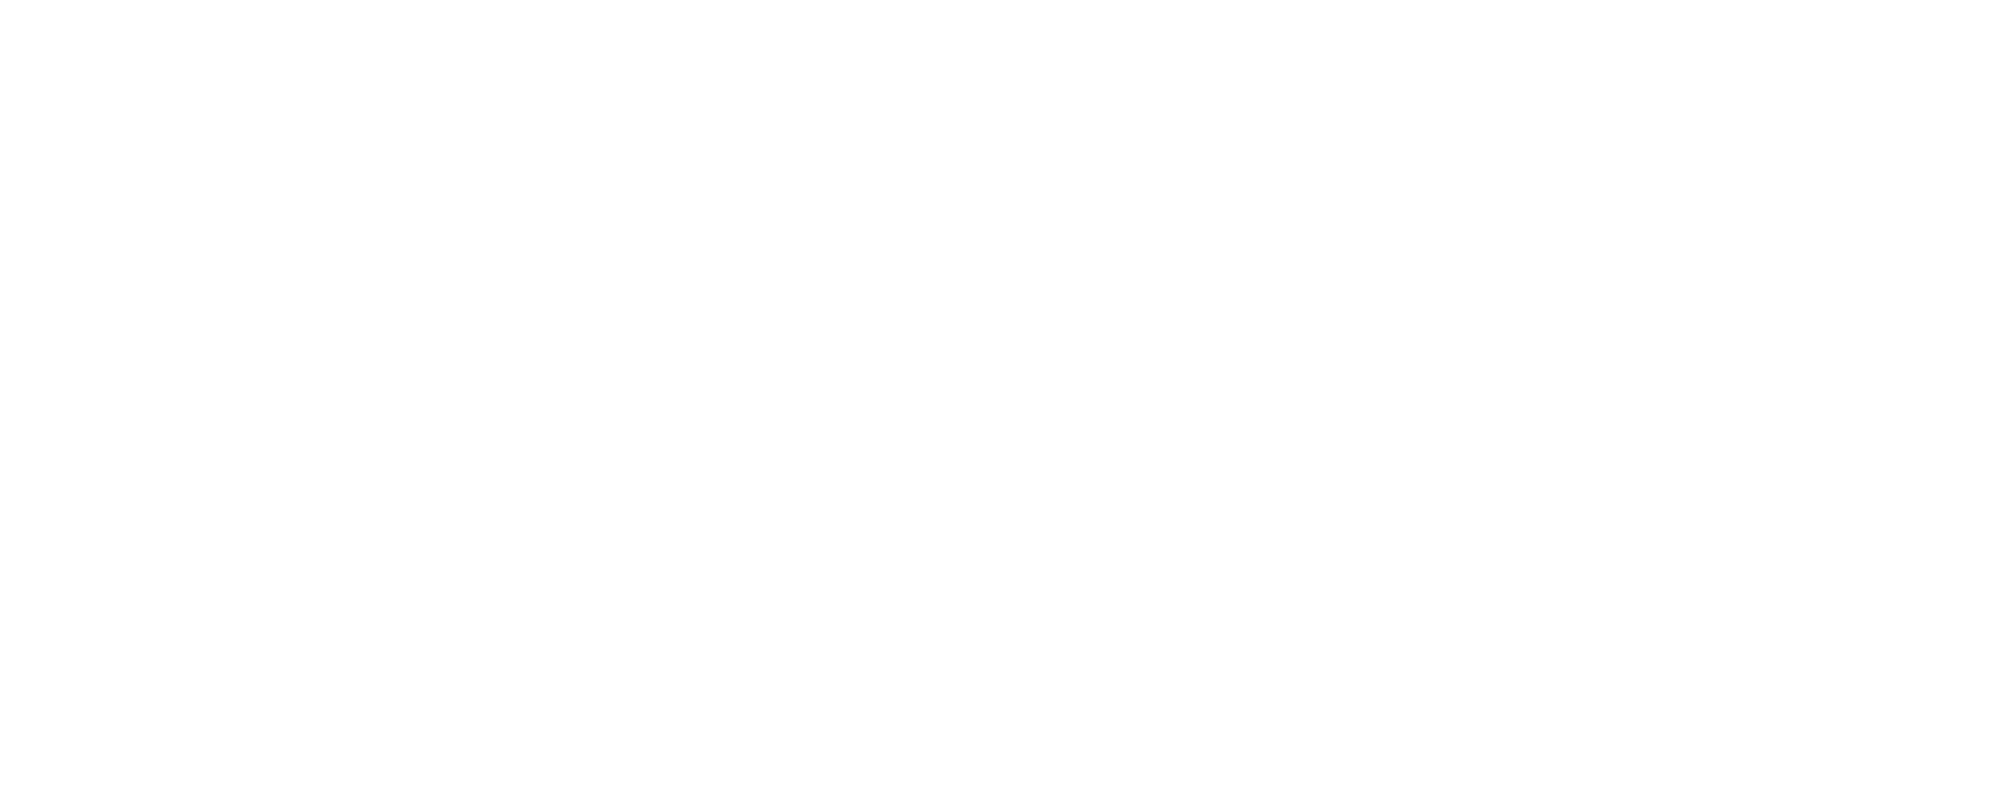 Beacon Security & Intelligence Limited